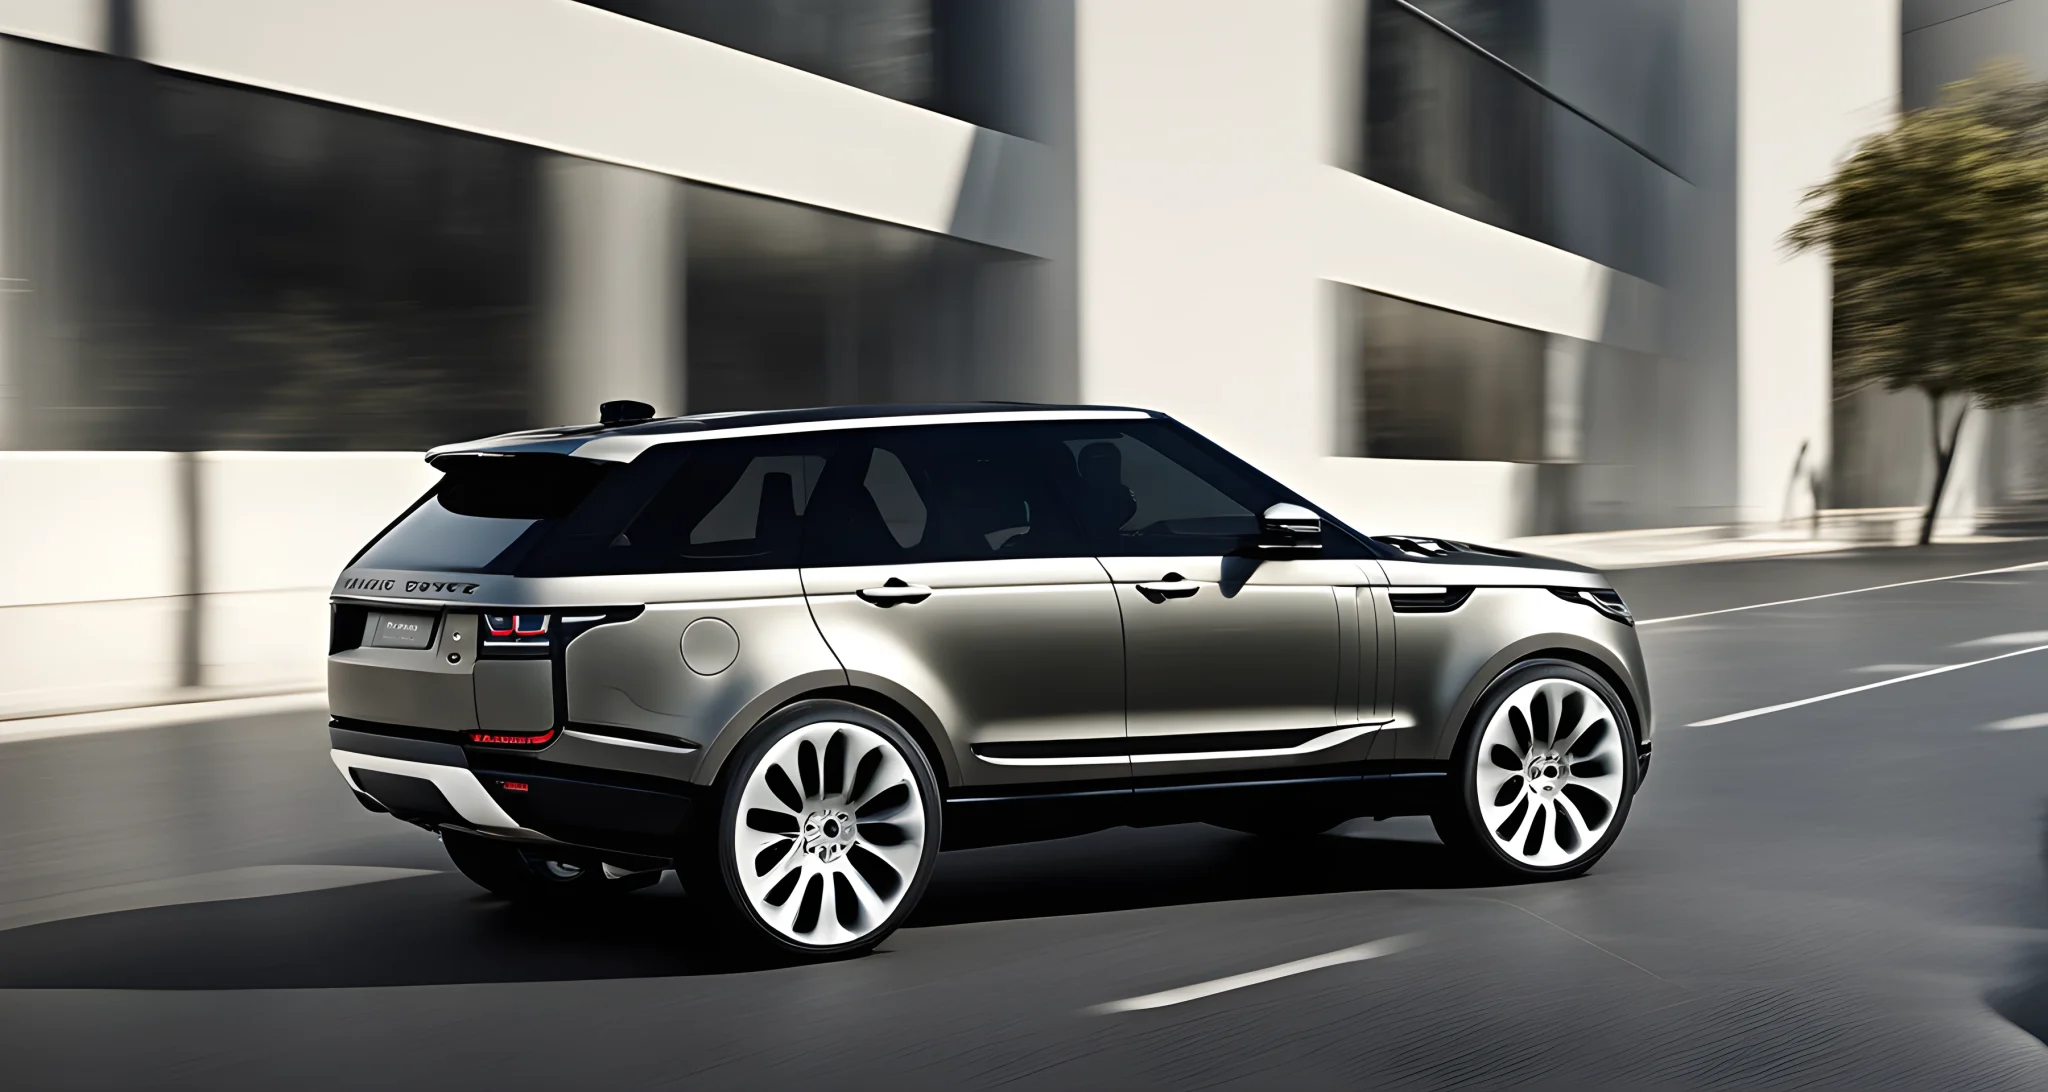 The image shows a sleek and modern Land Rover luxury car with advanced driving technologies.